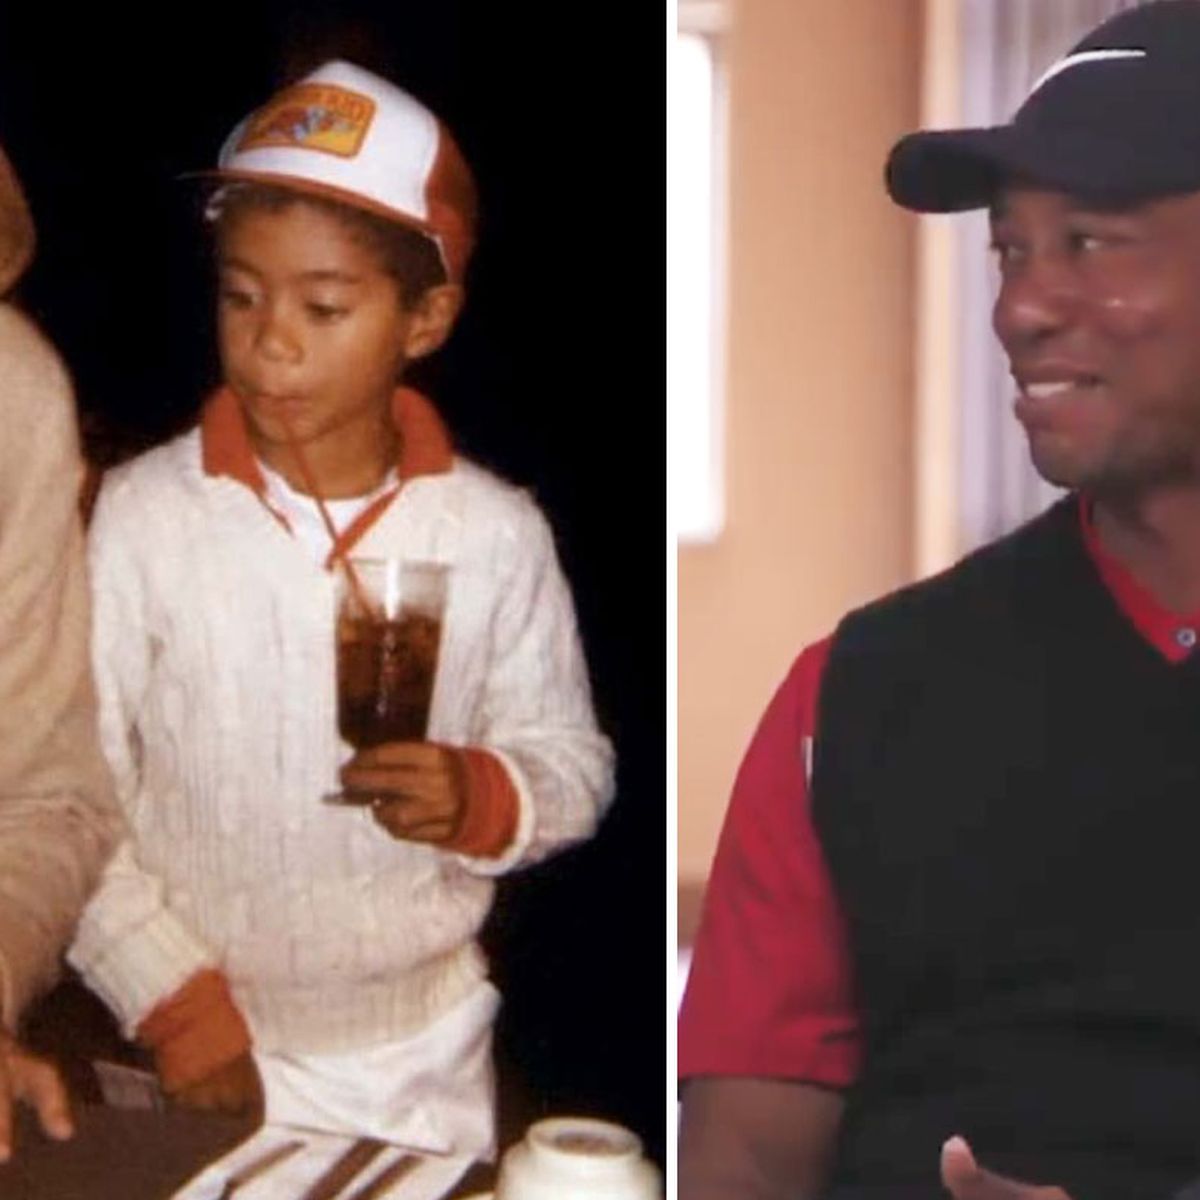 Tiger Woods Equals Sam Snead Pga Tour Wins Record Reflects On 1982 Meeting In Calabasas La As A 5 Year Old